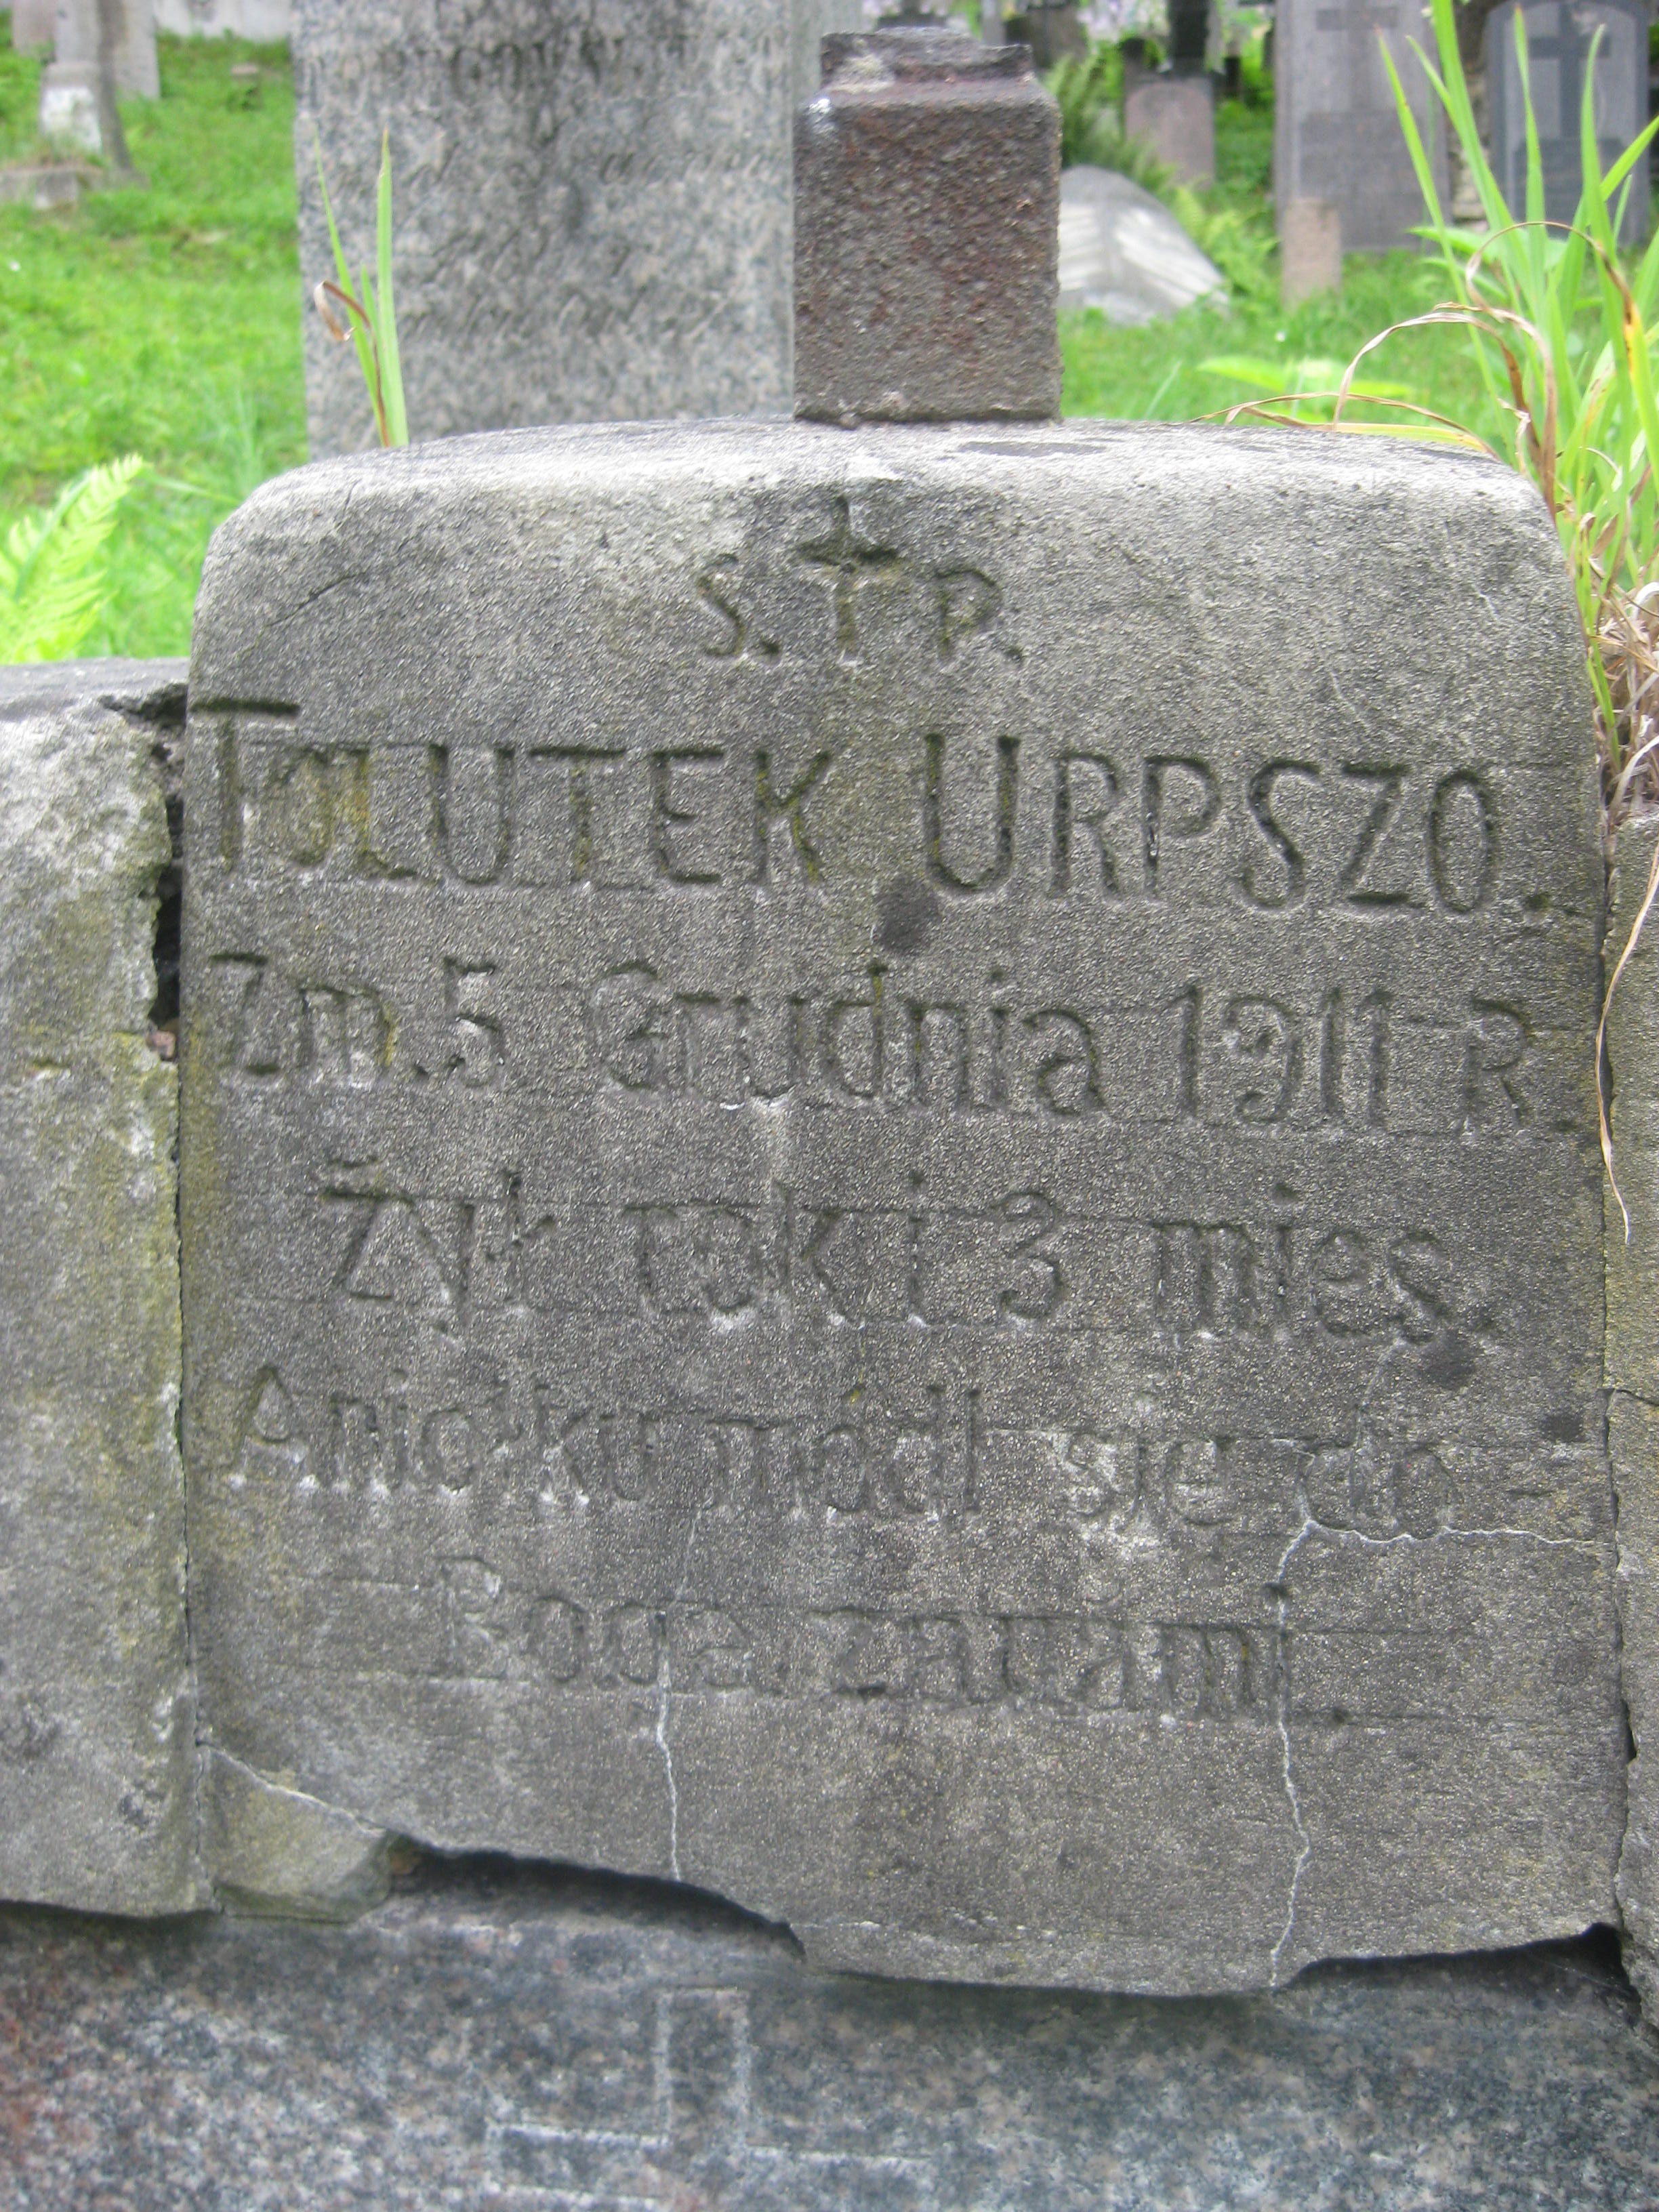 Fragment of Anatol Urpszo's tombstone, Ross cemetery, as of 2013